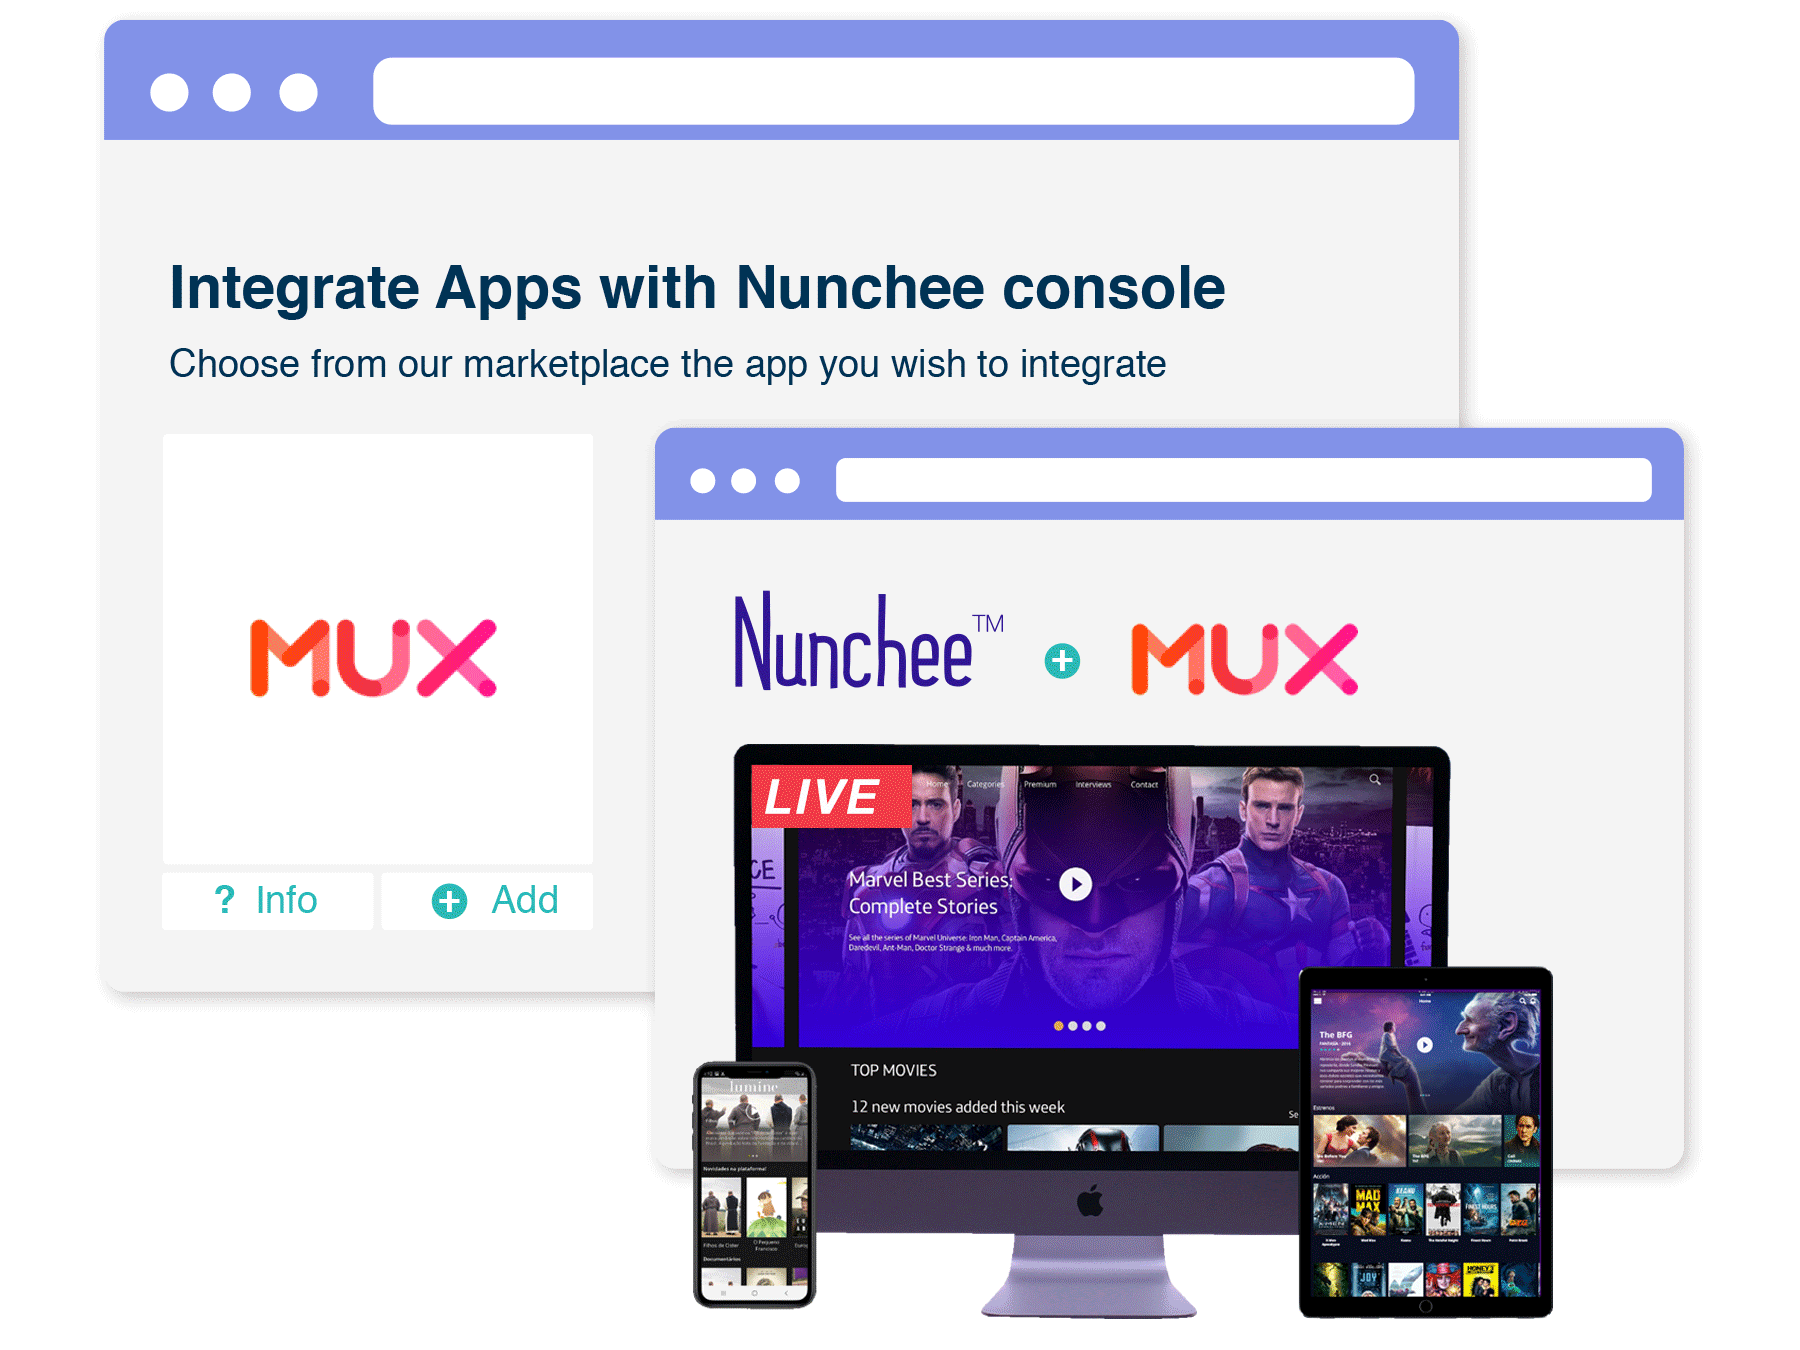 An image of Mux + Nunchee